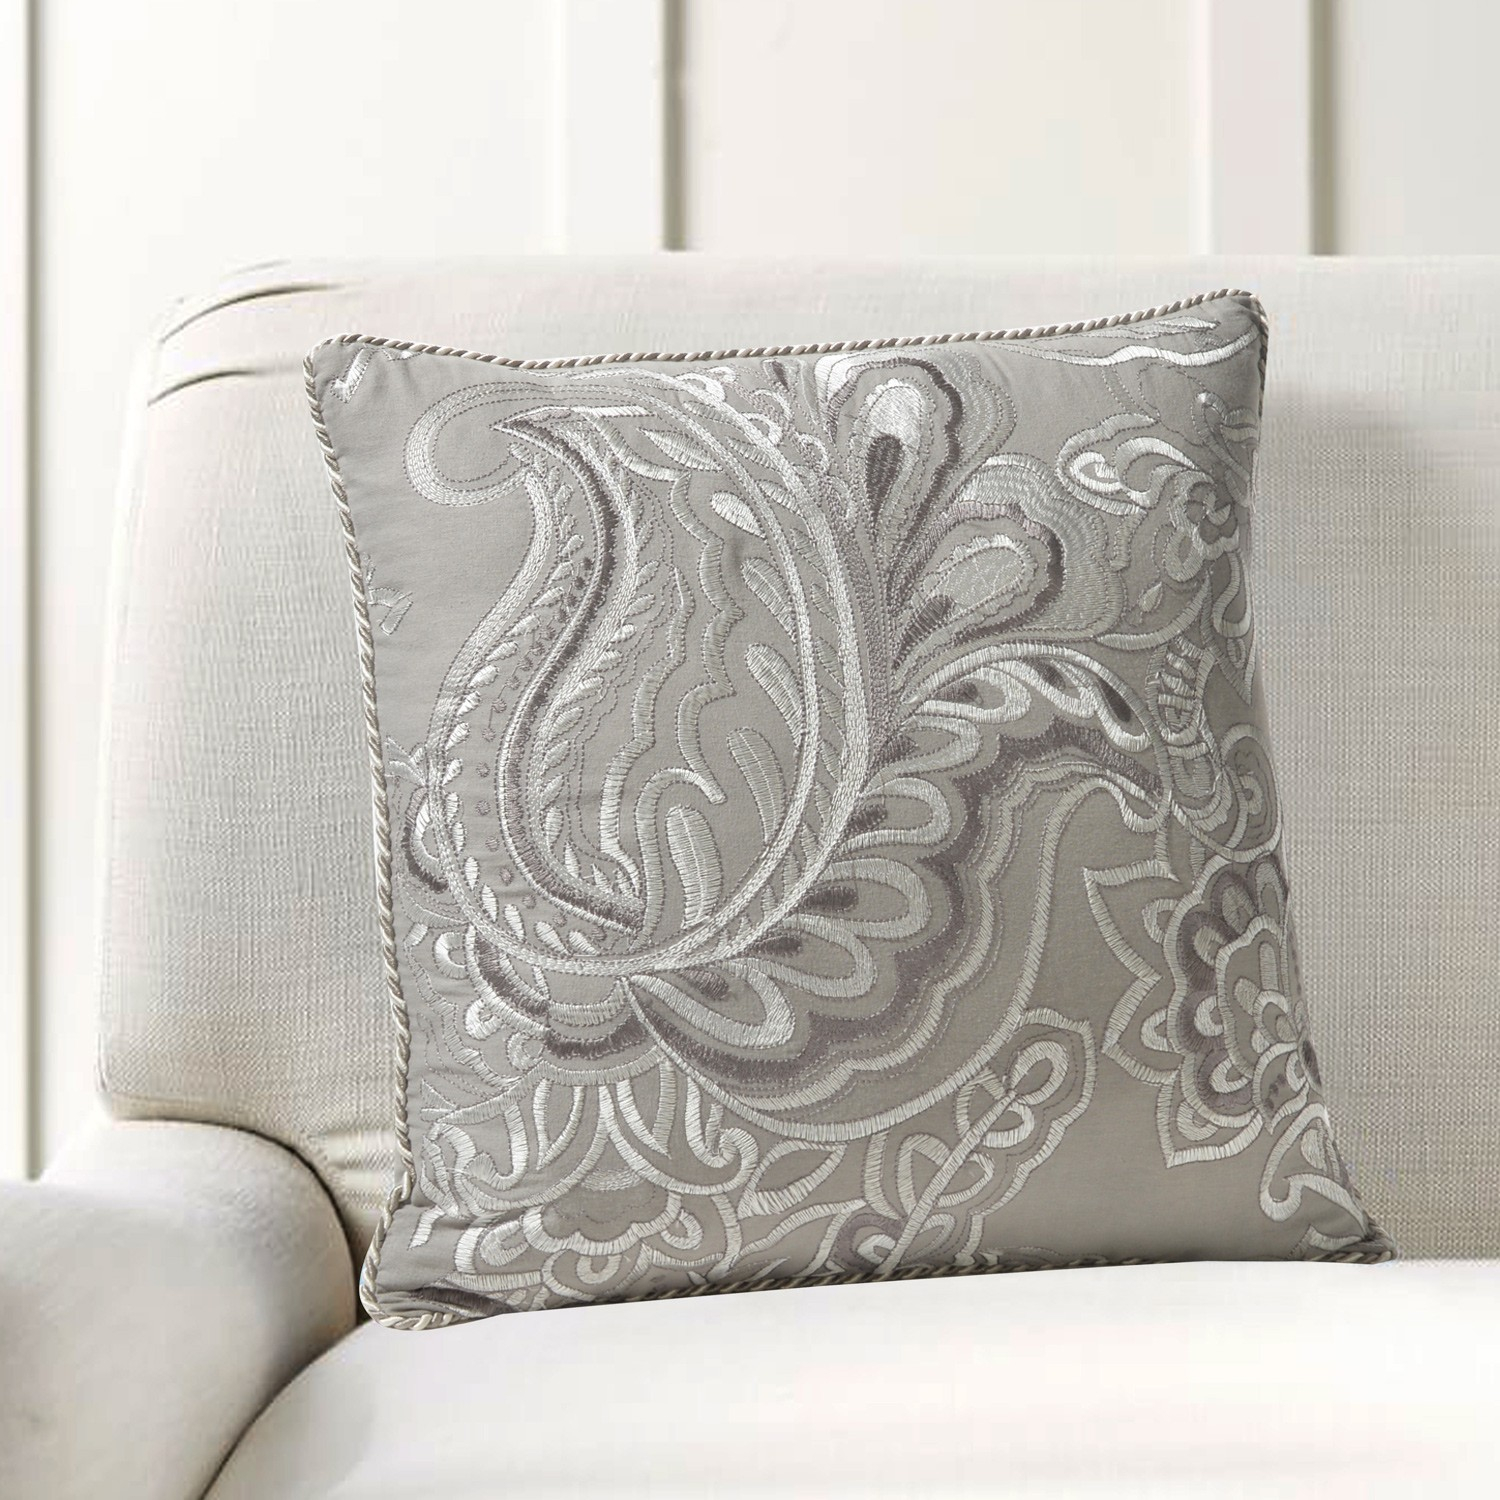 Cushion Cover Embroidery Patterns Cushion Cover Floral Embroidery 16x16 Grey